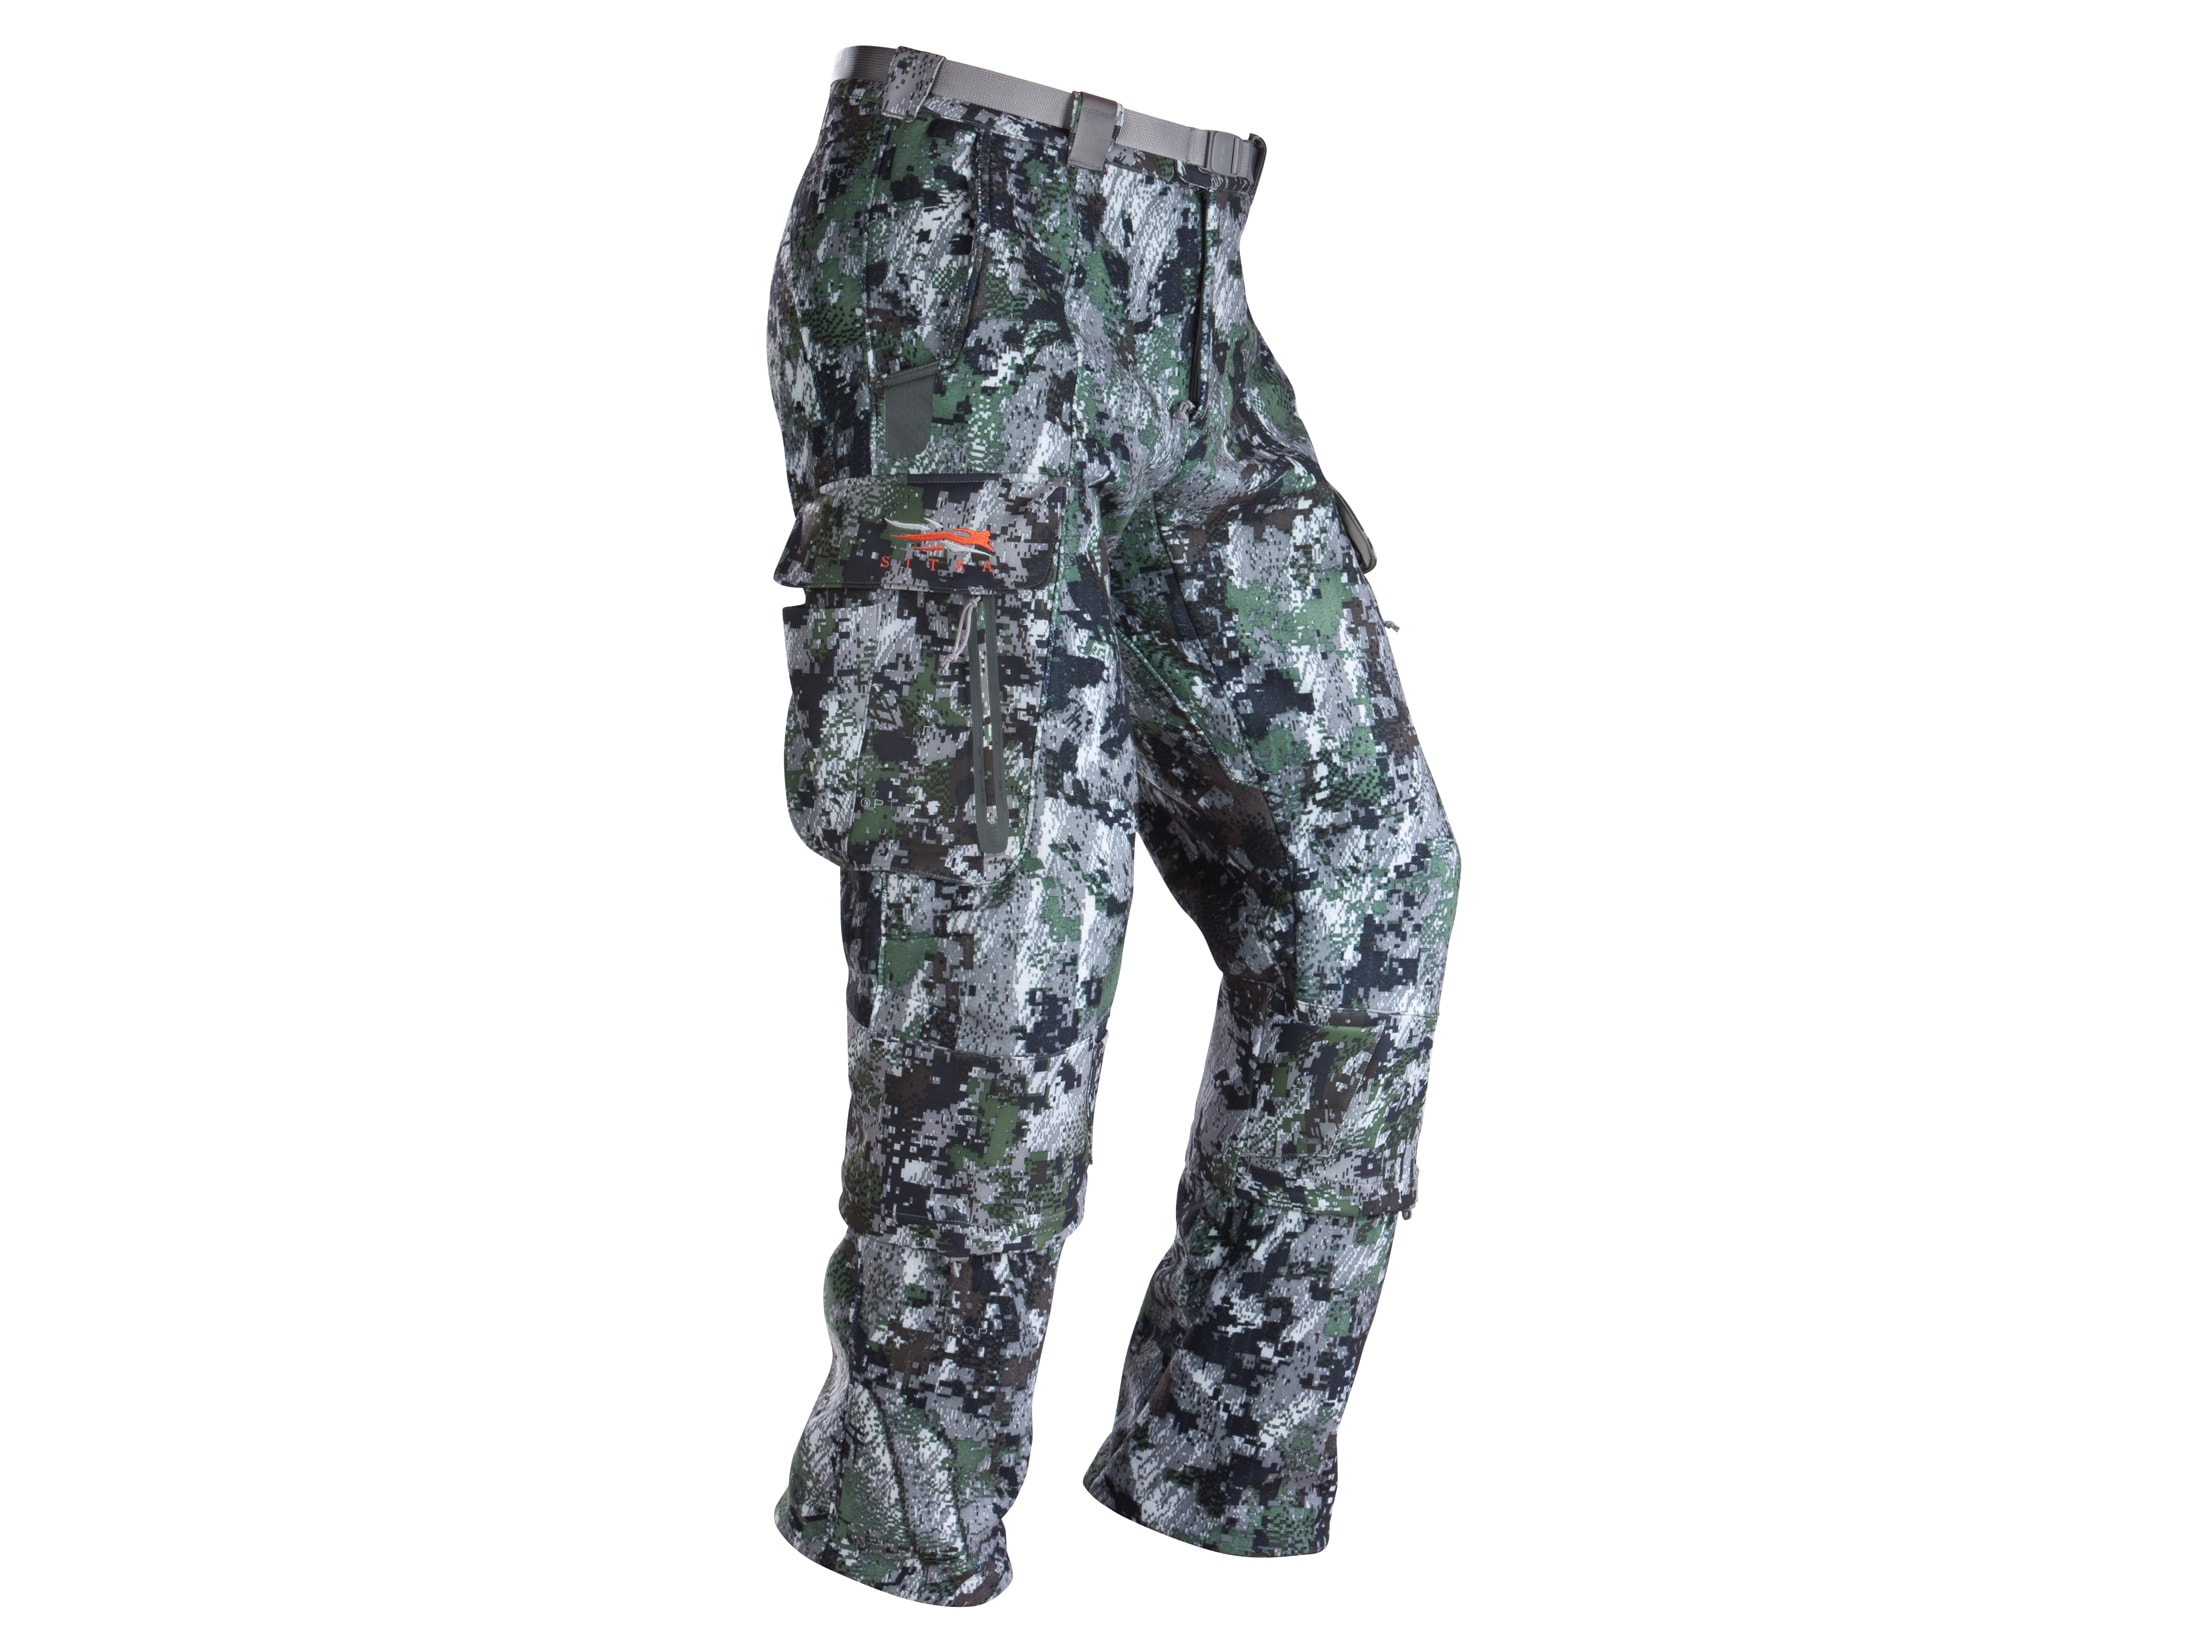 Sitka Gear Men's Stratus Tall Pants Polyester Gore Optifade Elevated